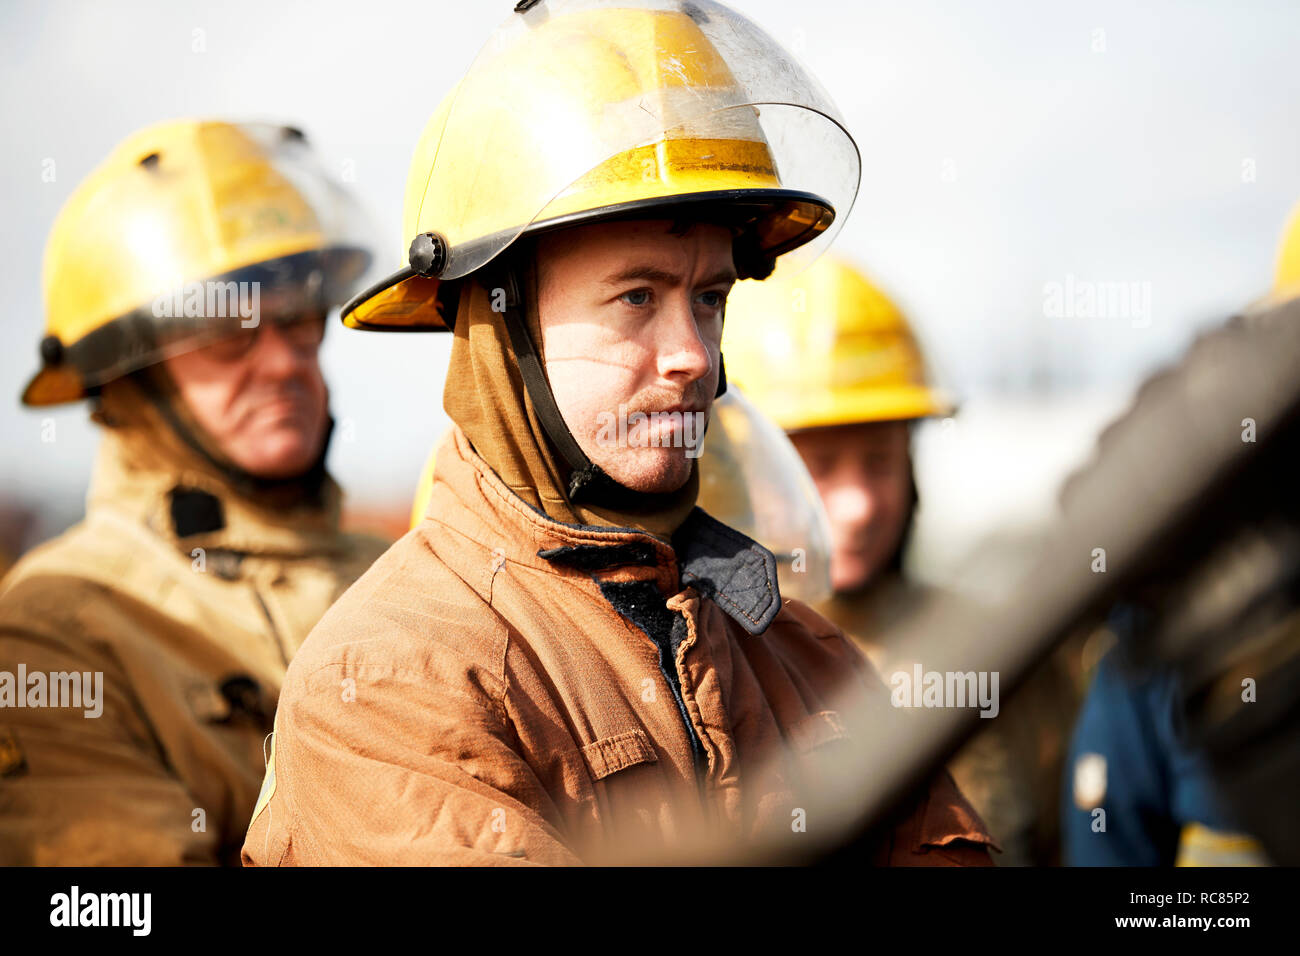 Firemen training, small group of firemen listening to instructions Stock Photo